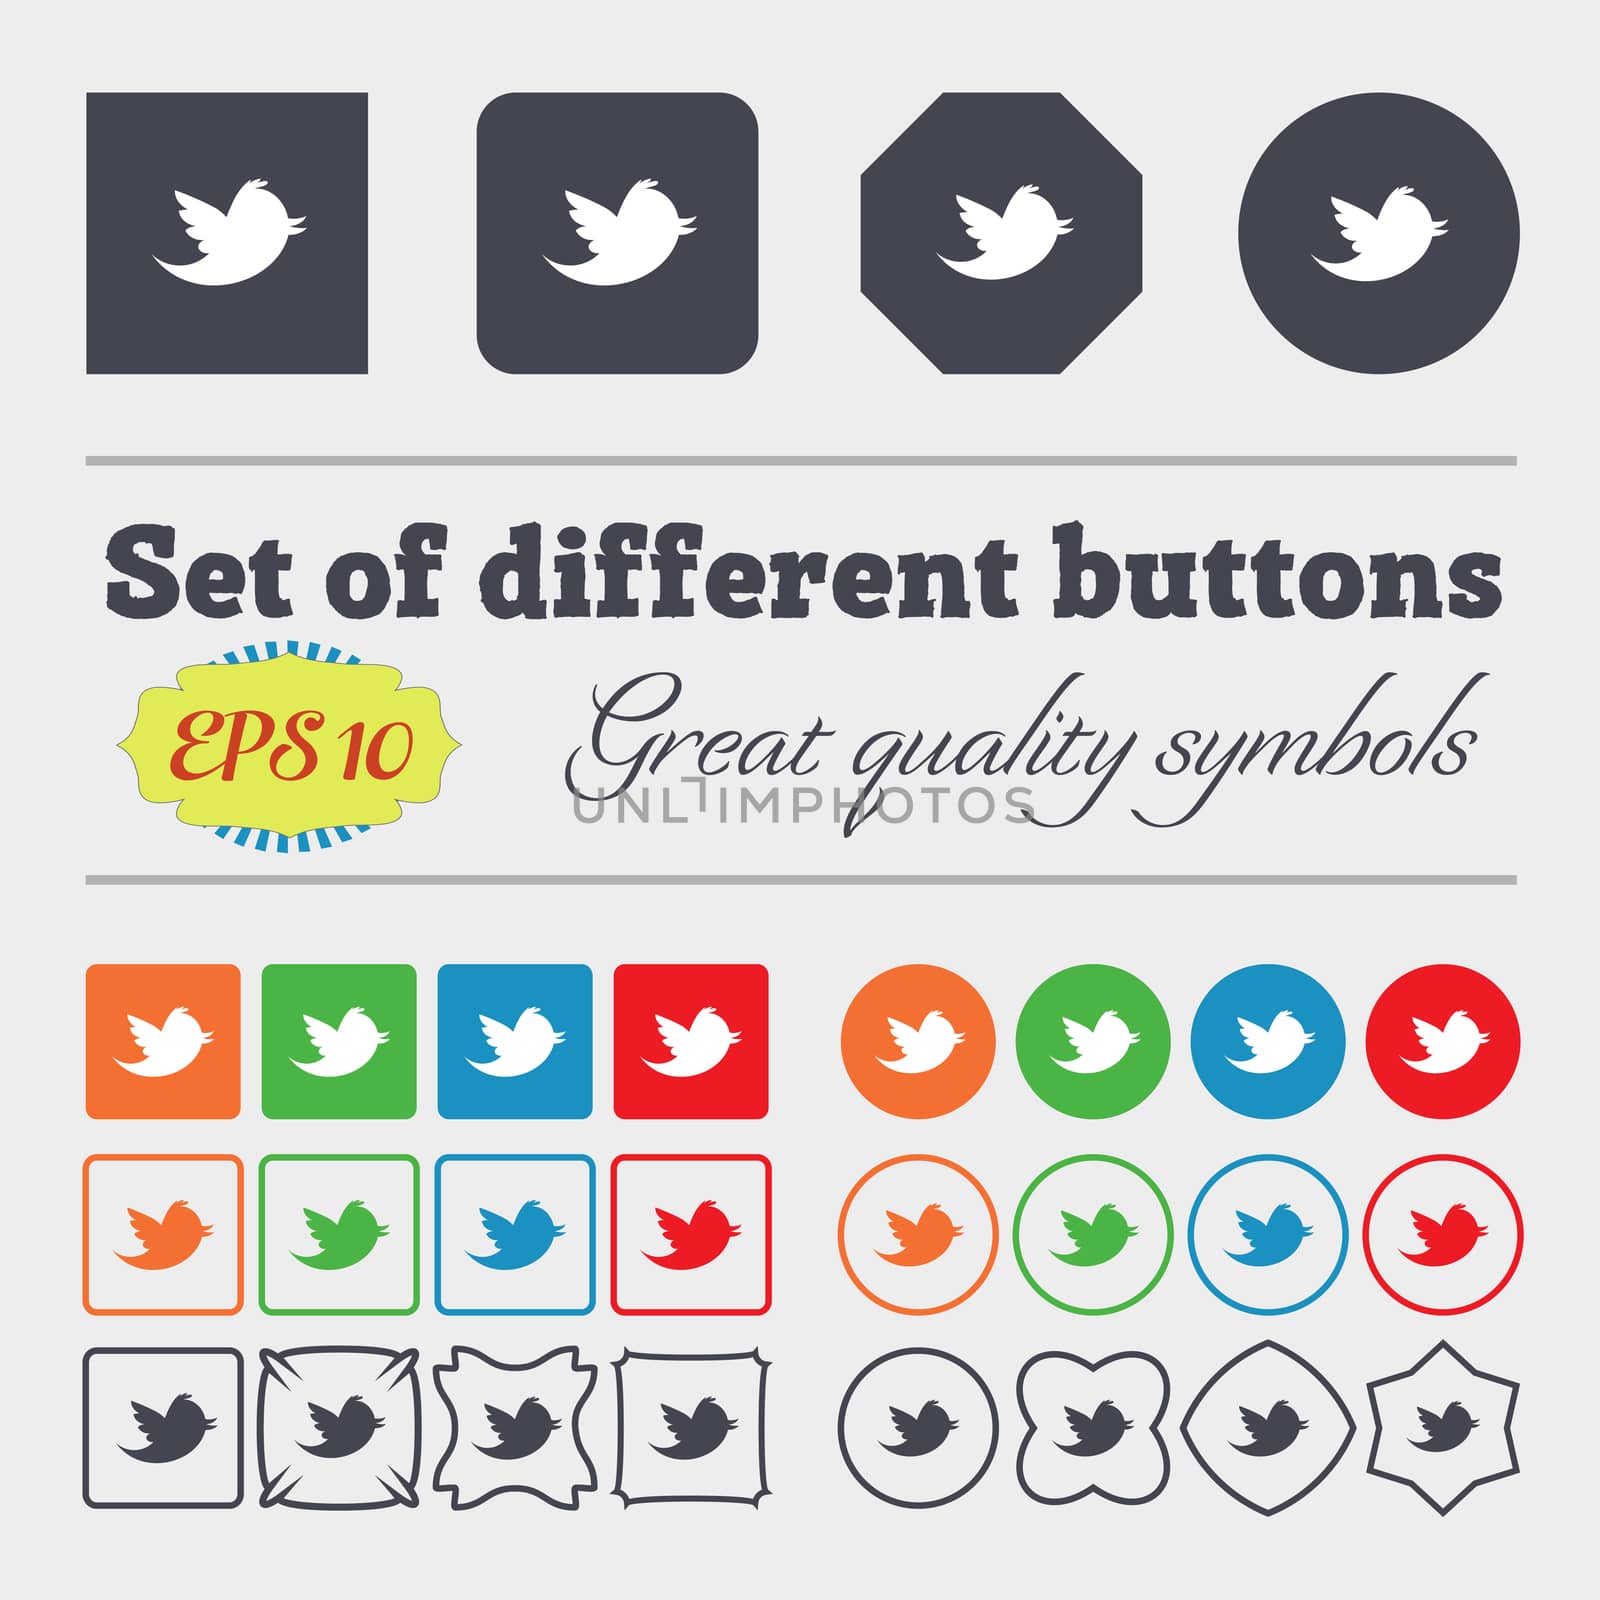 messages retweet icon sign Big set of colorful, diverse, high-quality buttons. illustration